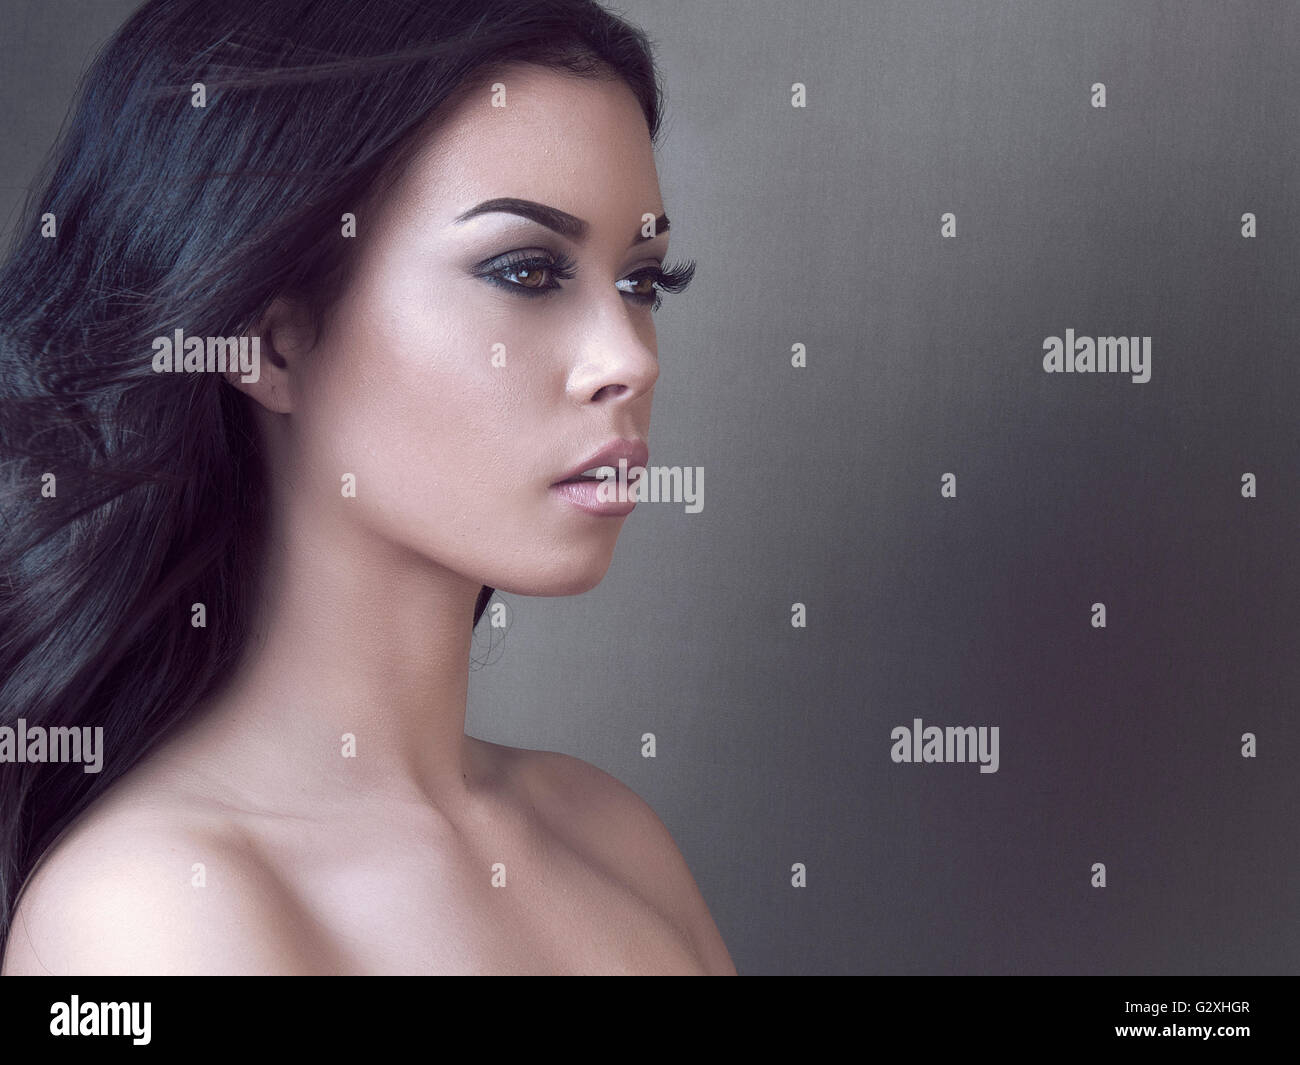 3d illustration of an exotic woman with a dark hair, black makeup and no  eyebrows on a black background Stock Photo - Alamy